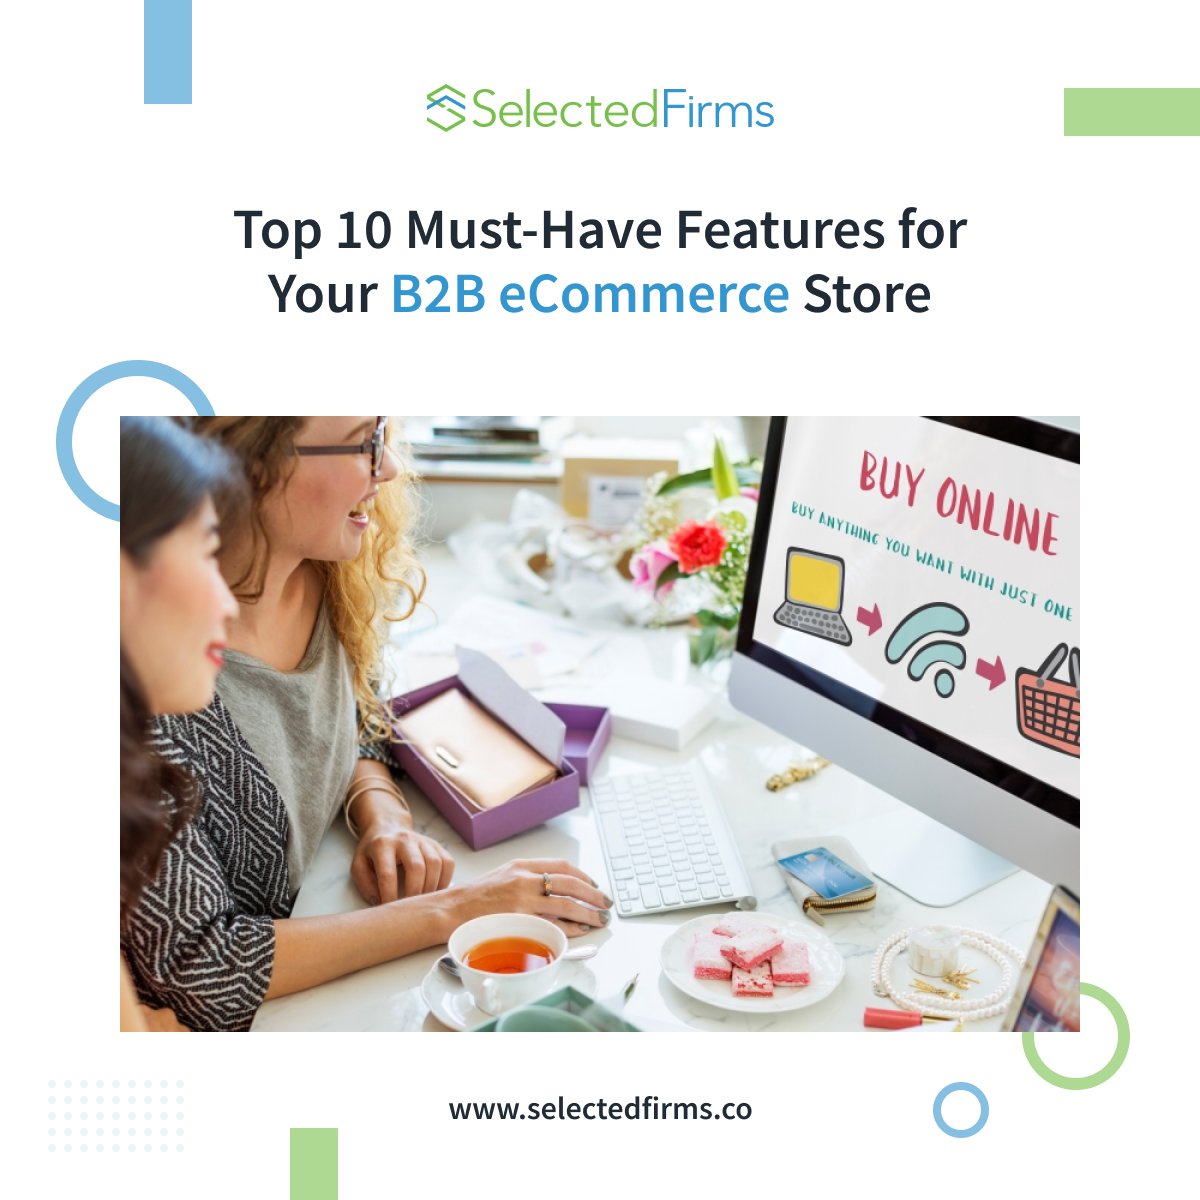 Do you believe in staying ahead in the competitive landscape of the eCommerce sector?
Here is a list of the top 10 must-have features for your B2B eCommerce store.
bit.ly/4a4ONp3
#selectedfirms #ecommerce #b2bcommerce #b2becommerce #ecommercefeatures #ecommercetips